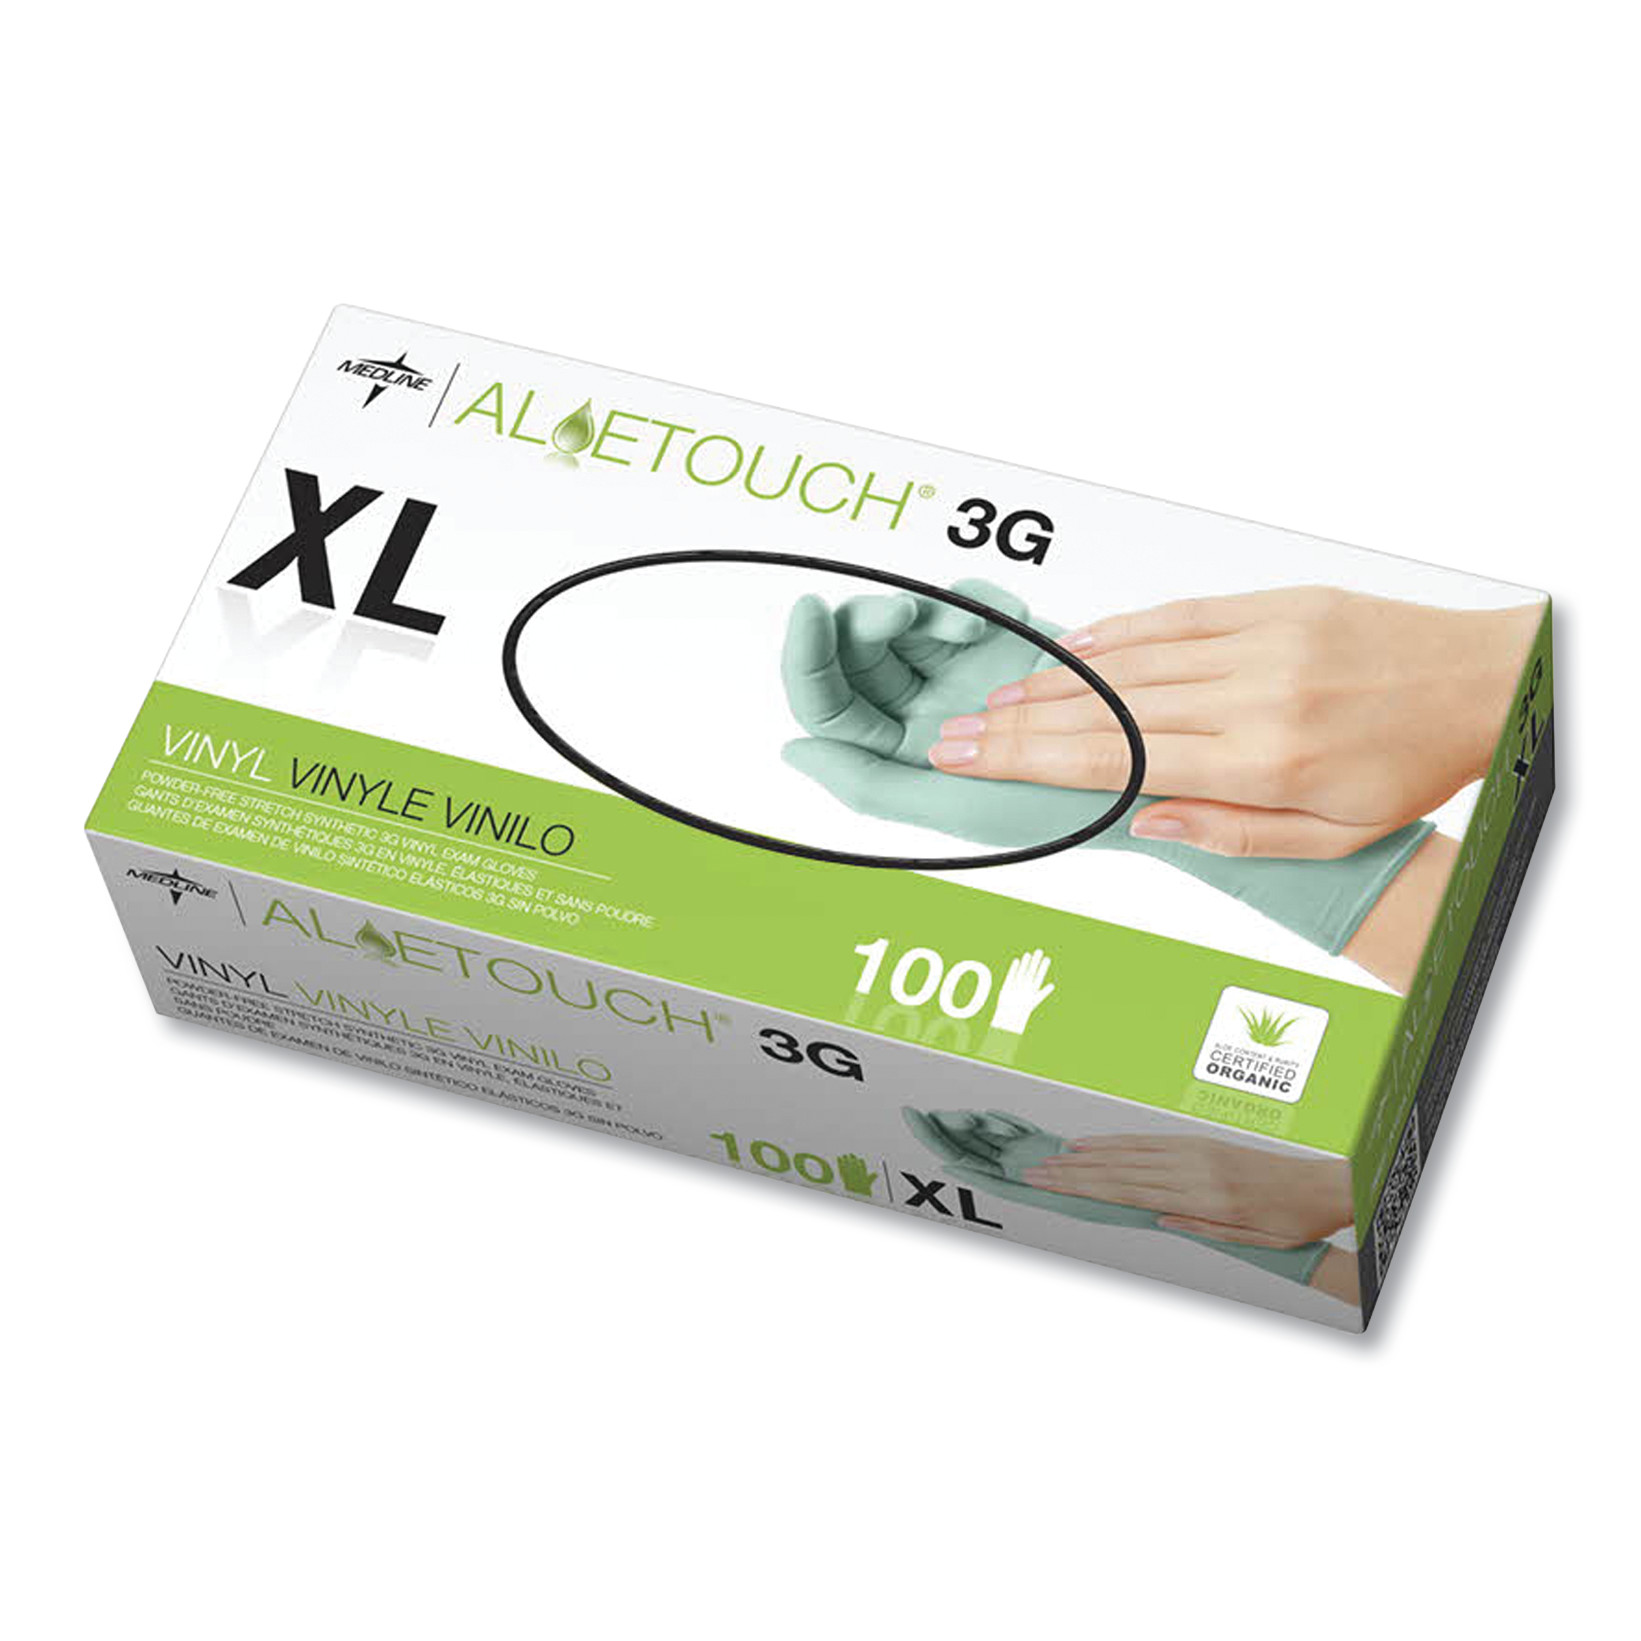  Medline 6MDS195177 Aloetouch 3G Synthetic Exam Gloves - CA Only, Green, X-Large, 100/Box (MII6MDS195177) 